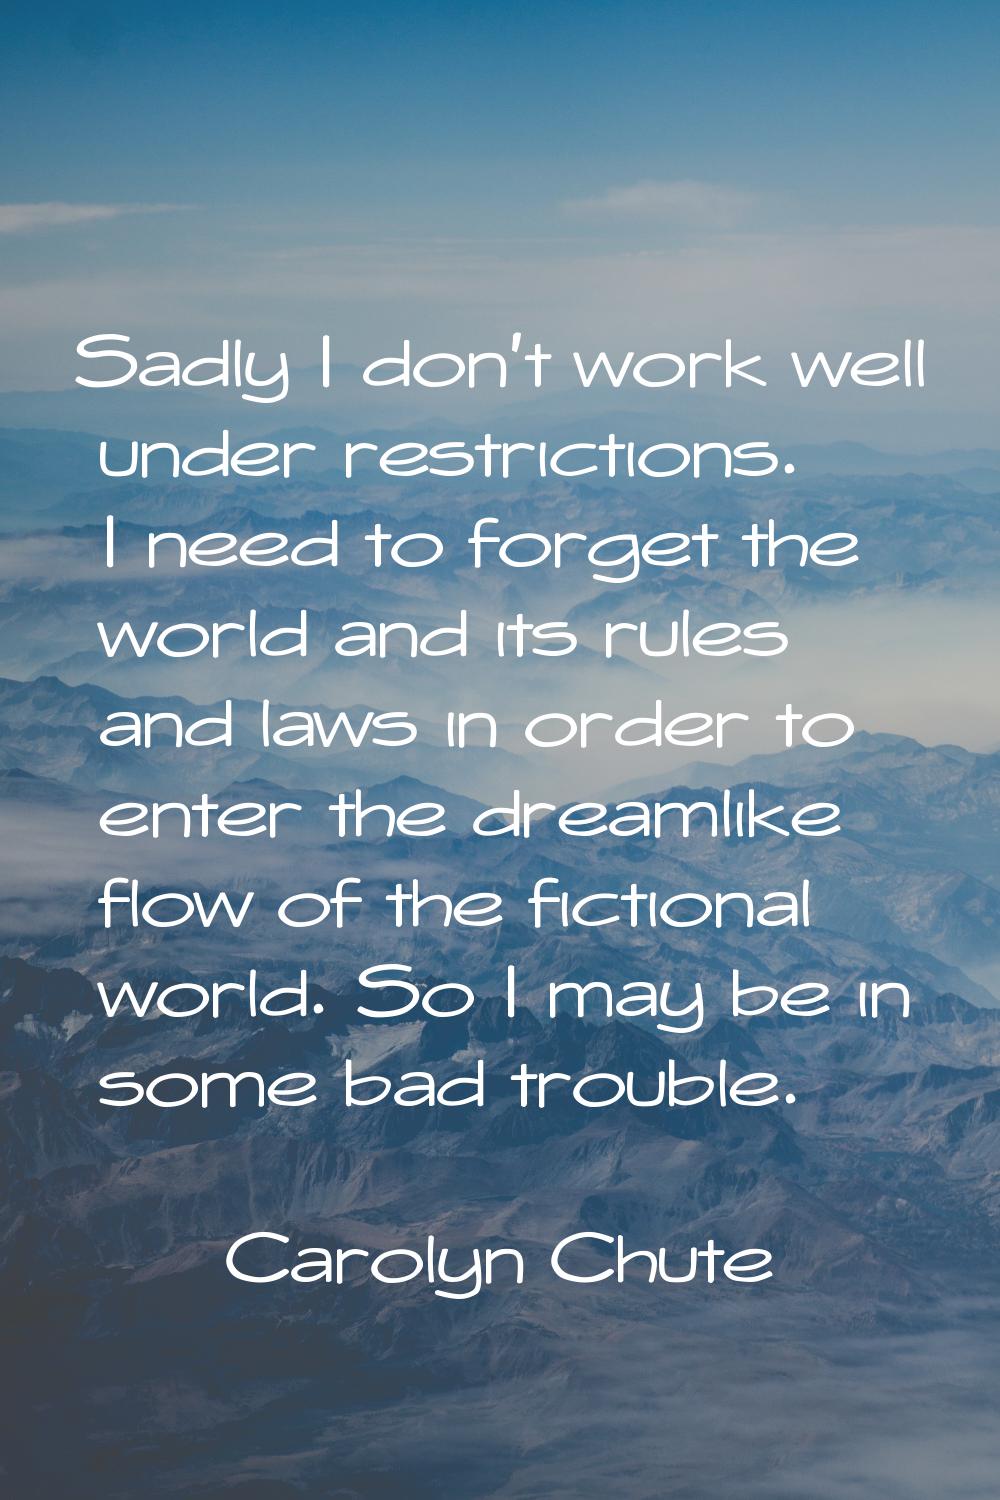 Sadly I don't work well under restrictions. I need to forget the world and its rules and laws in or